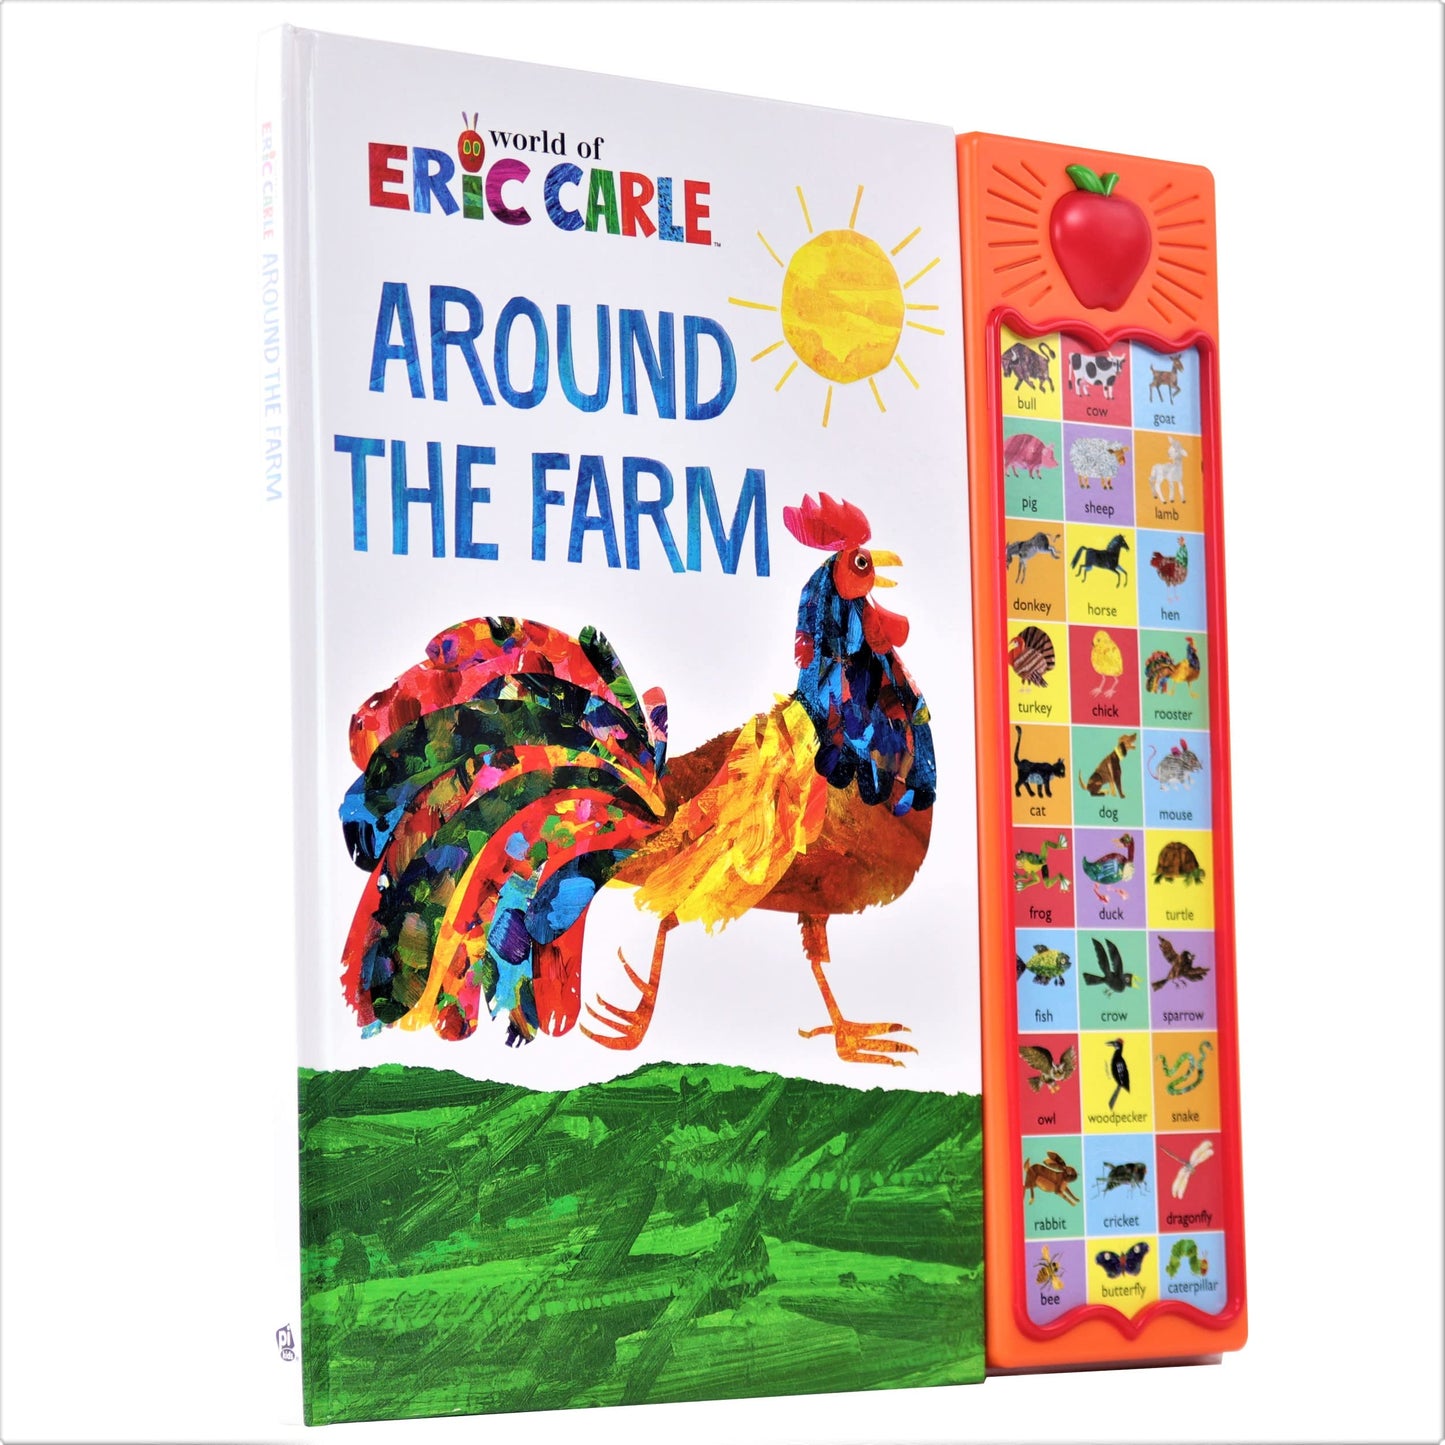 World of Eric Carle, Around the Farm 30-Button Animal Sound Book - Great for First Words - PI Kids [Hardcover] PI Kids; Editors of Publications International and Eric Carle